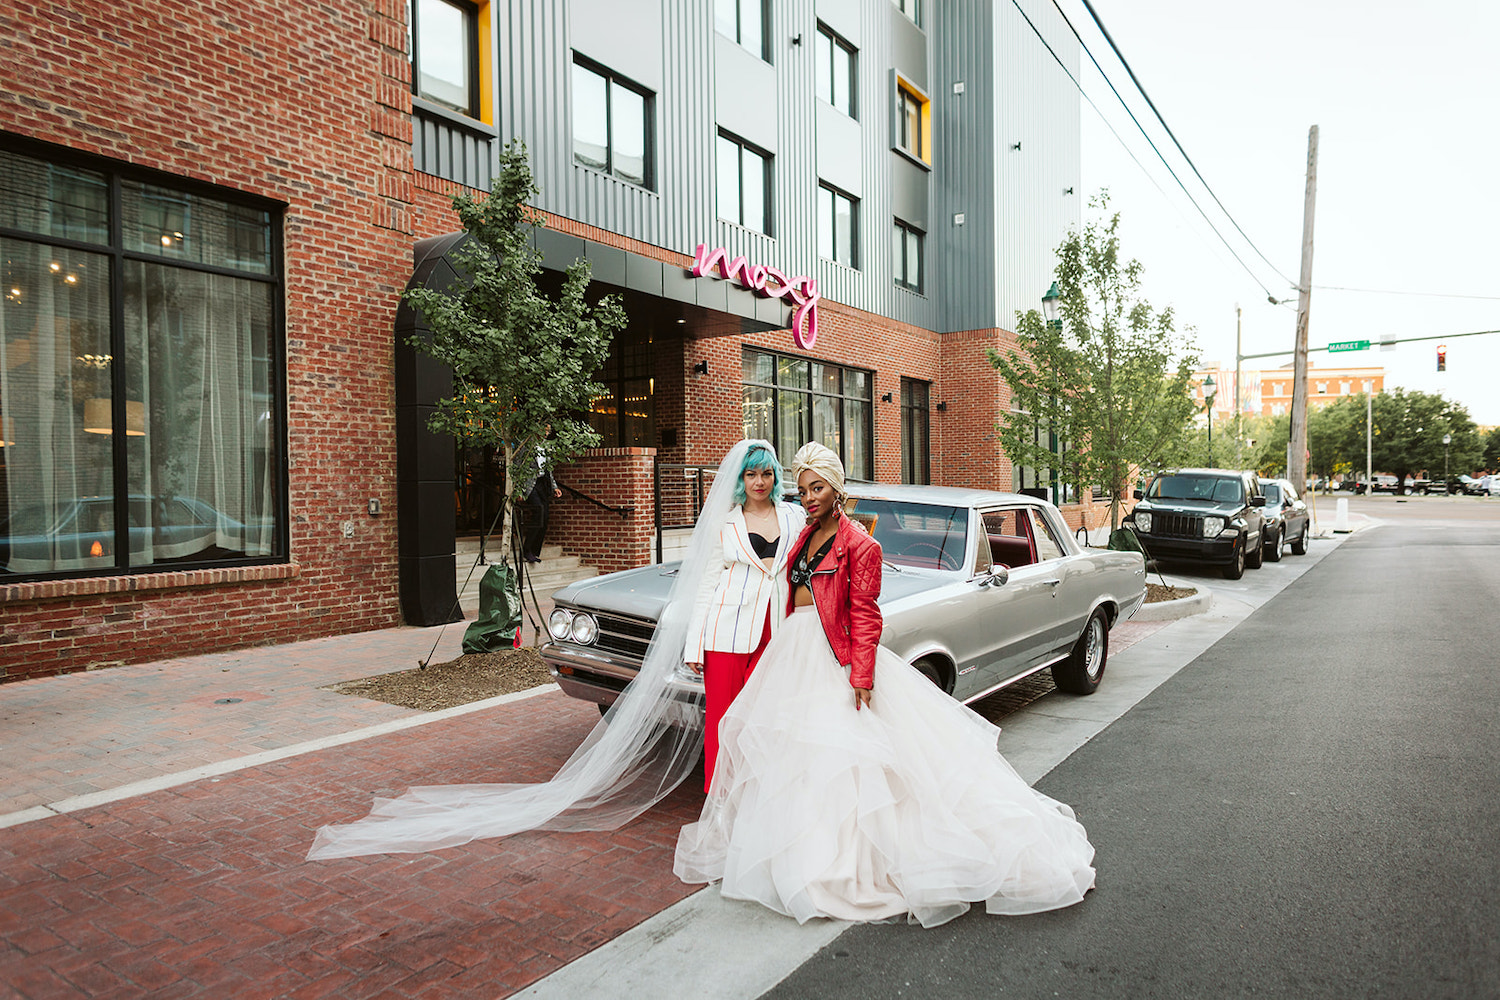 LGBTQ wedding styled shoot in downtown Chattanooga at Moxy Hotel with two brides standing on street in front of vintage car